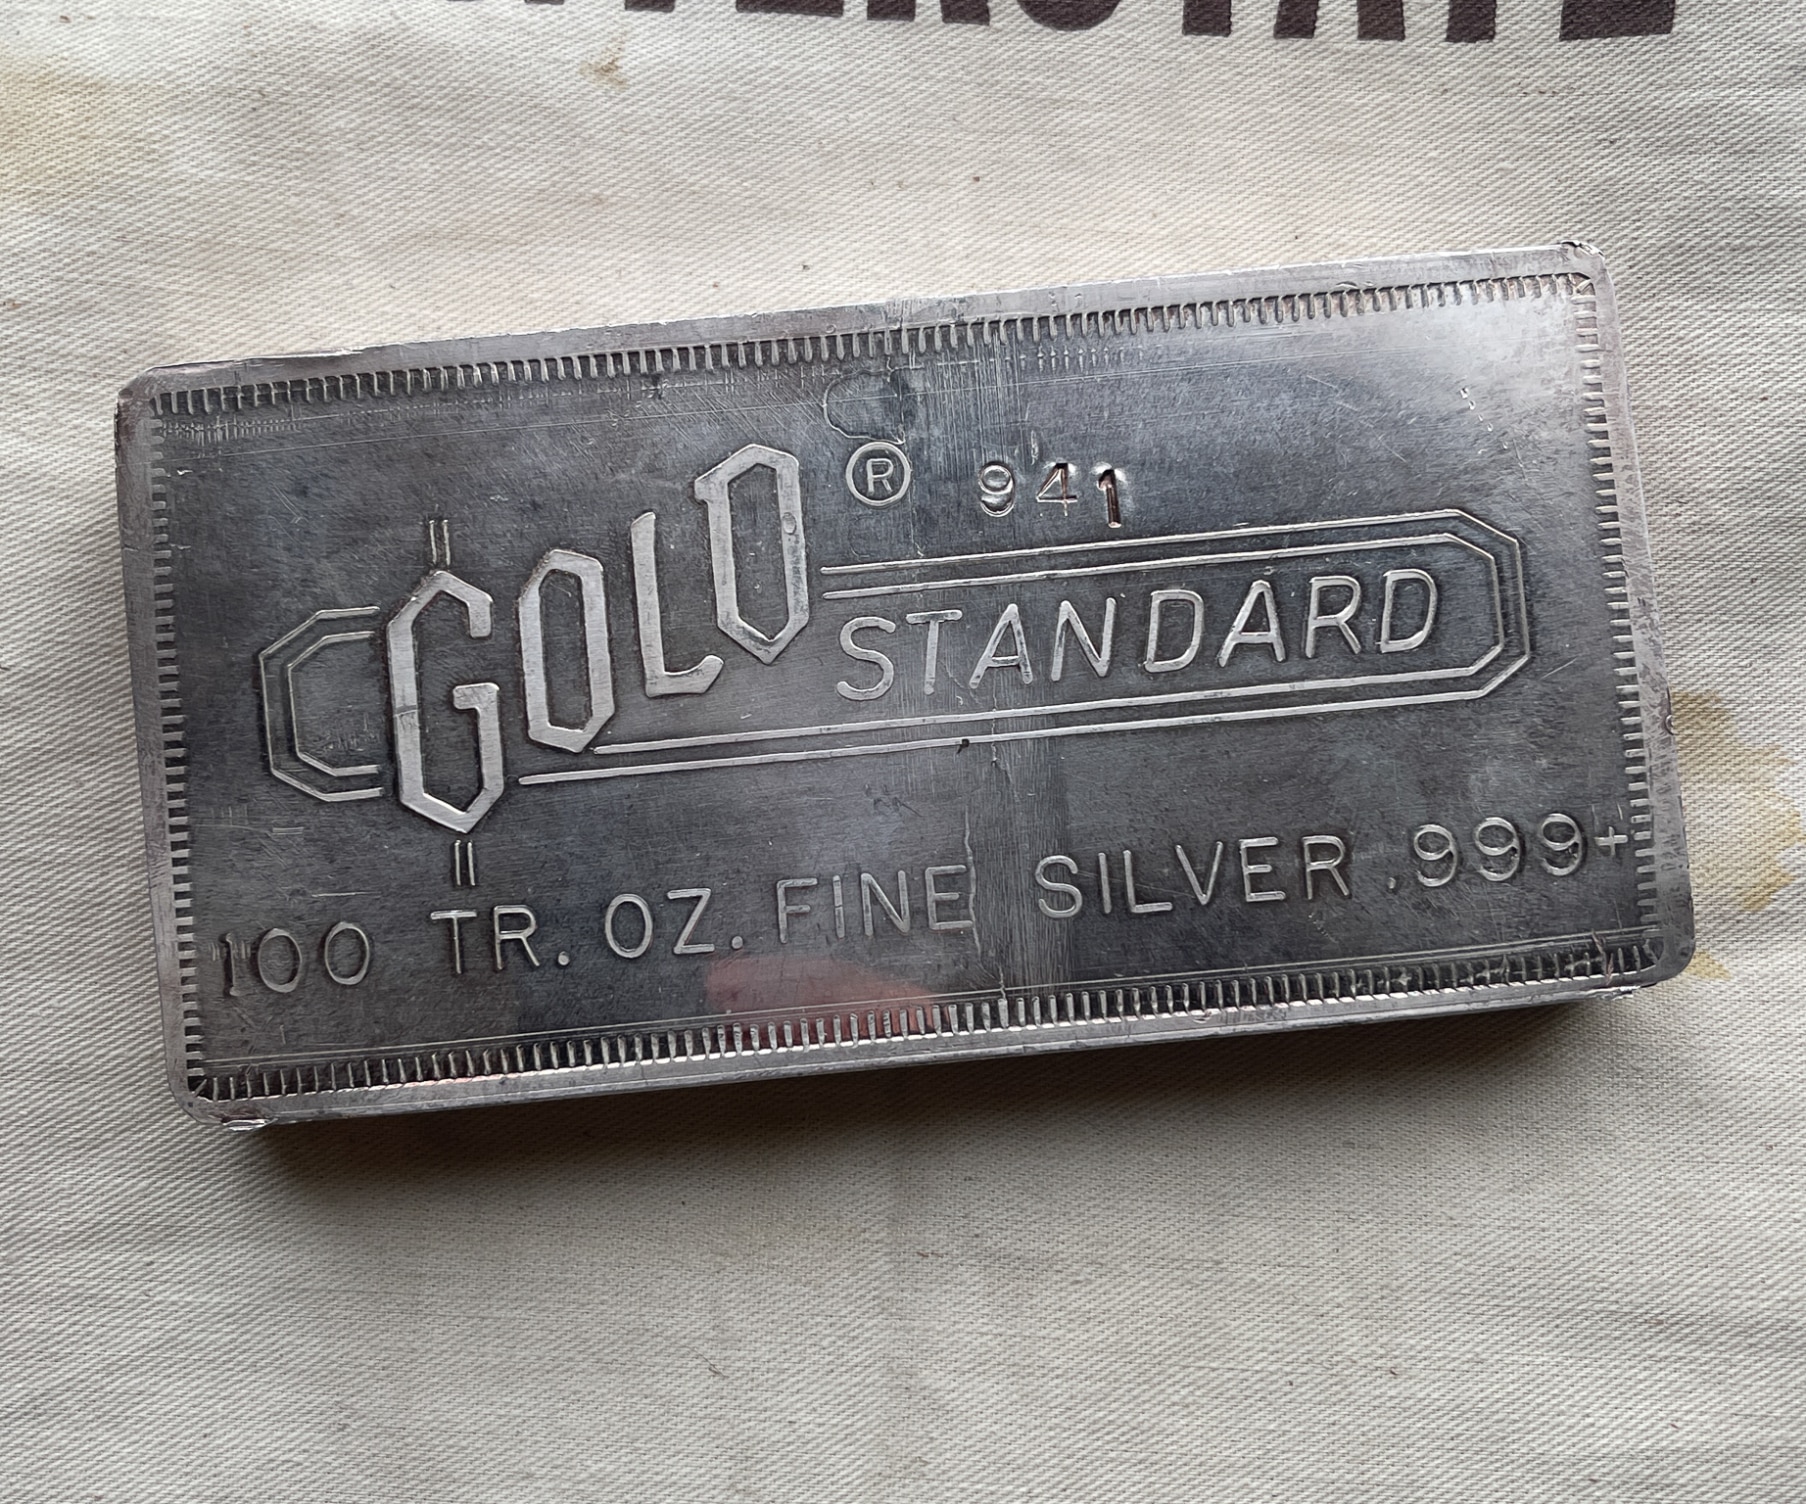 Gold Standard 100 front